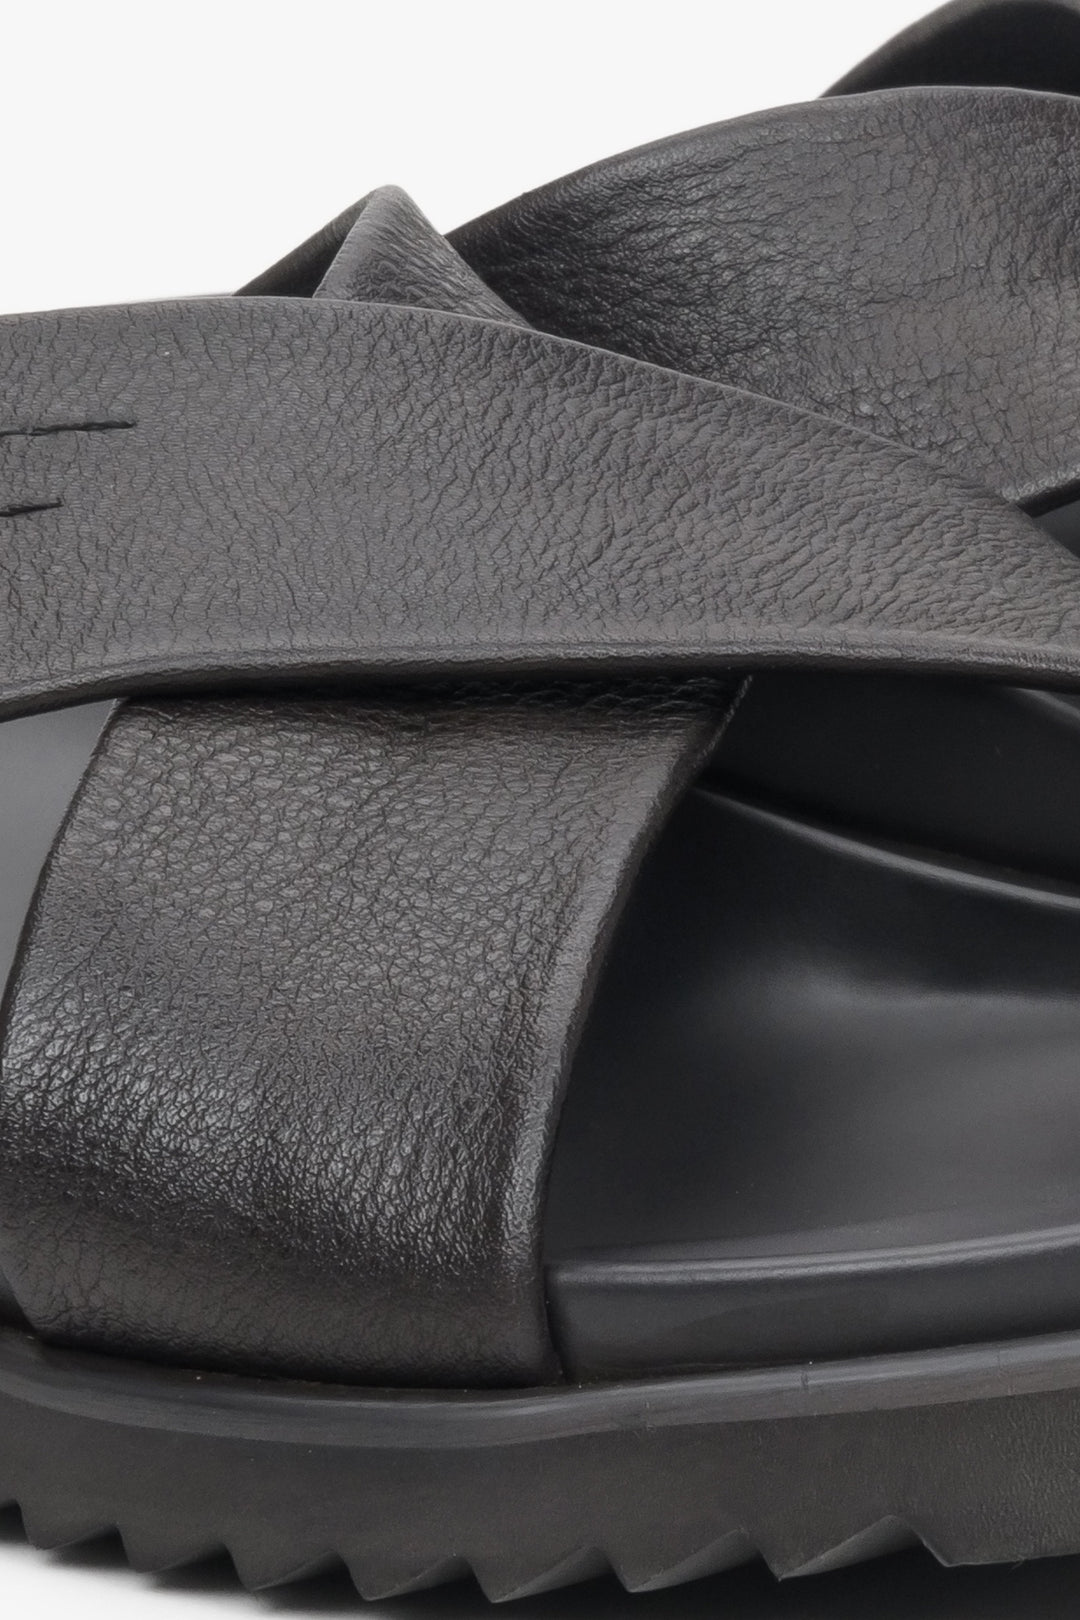 Men's dark brown leather sandals by Estro - close-up on the details.